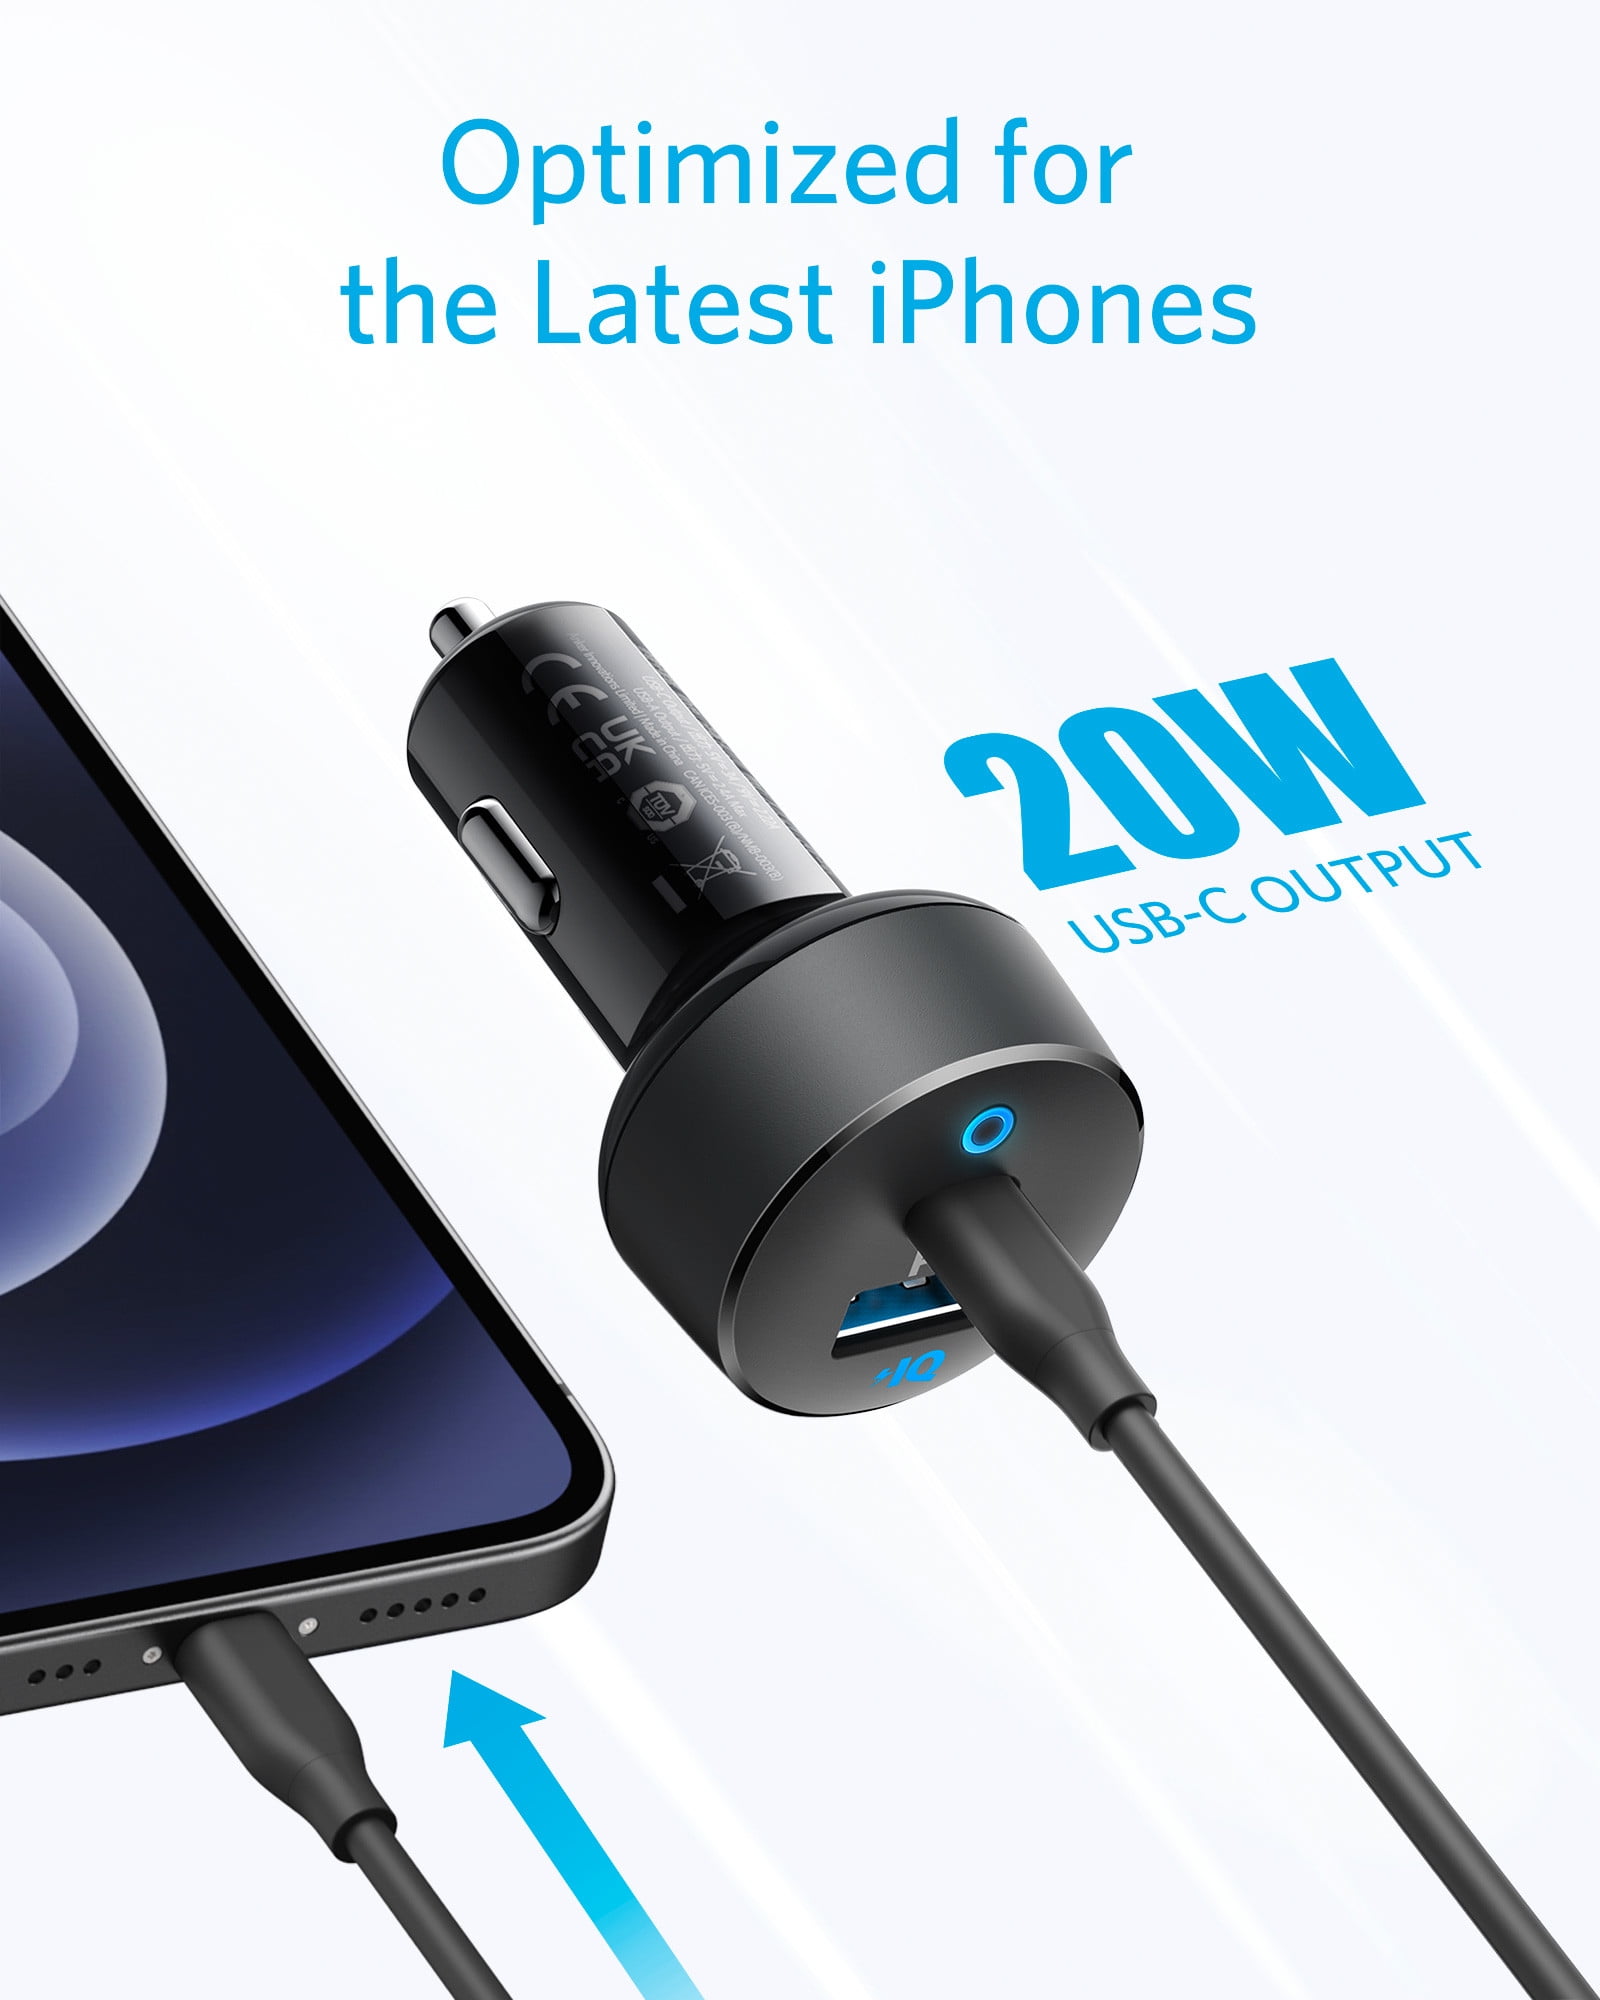  Car Charger, Anker Quick Charge 3.0 39W Dual USB Car Charger  Adapter, PowerDrive Speed 2 for Galaxy S10/S9/S8/S7/S6/Plus, Note 9,  Poweriq for iPhone 11/XS/Max/XR/X/8/7, Ipad Pro, LG, Nexus, and More 